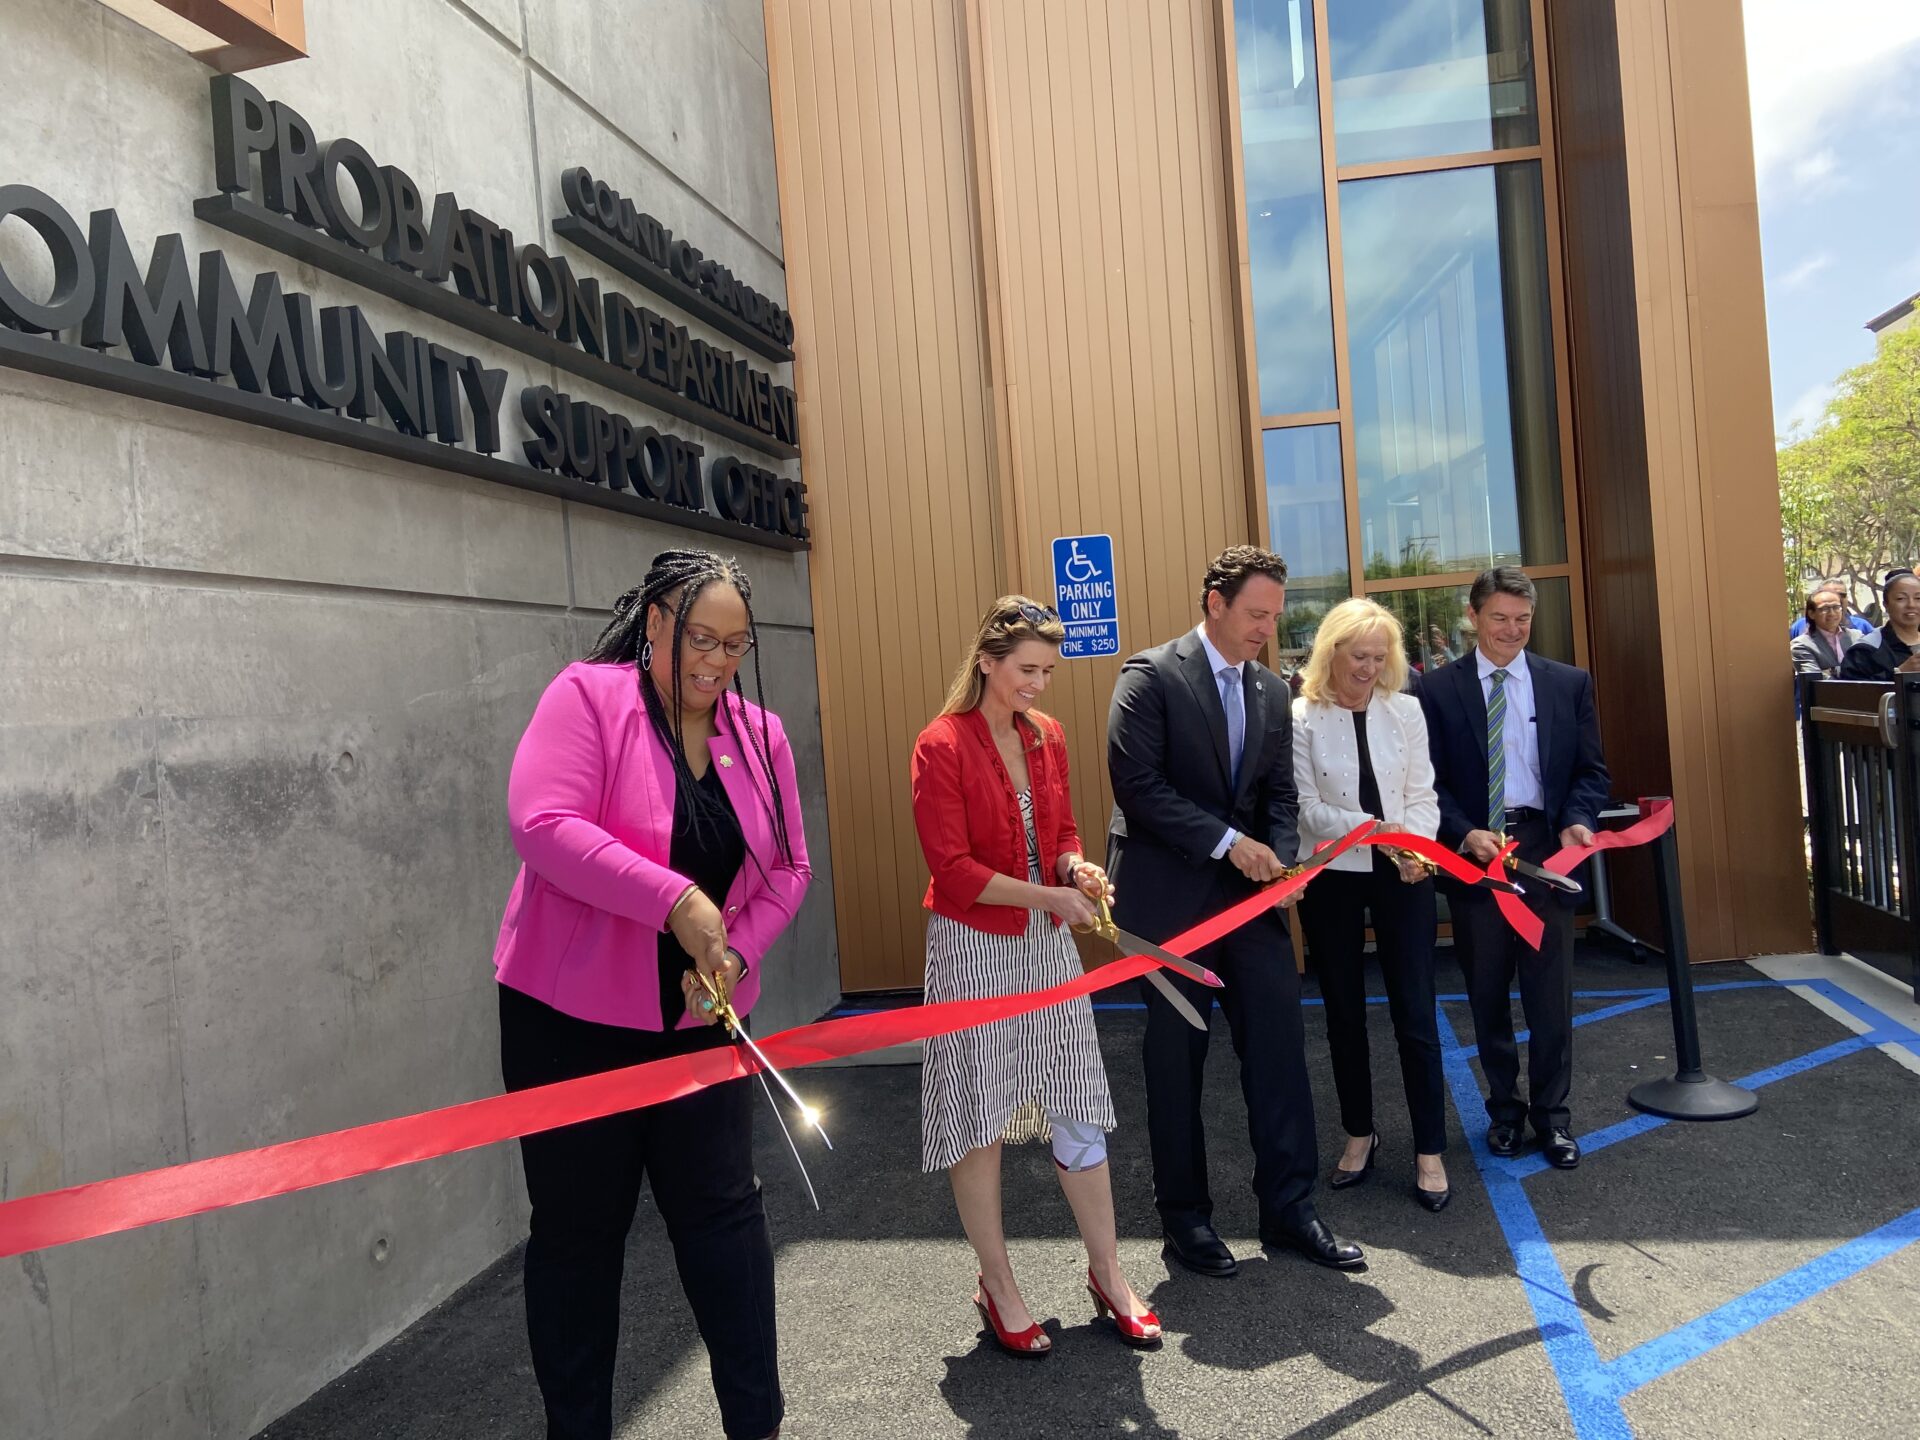 San Diego County officials cut ribbon in front of new Community Support Office building